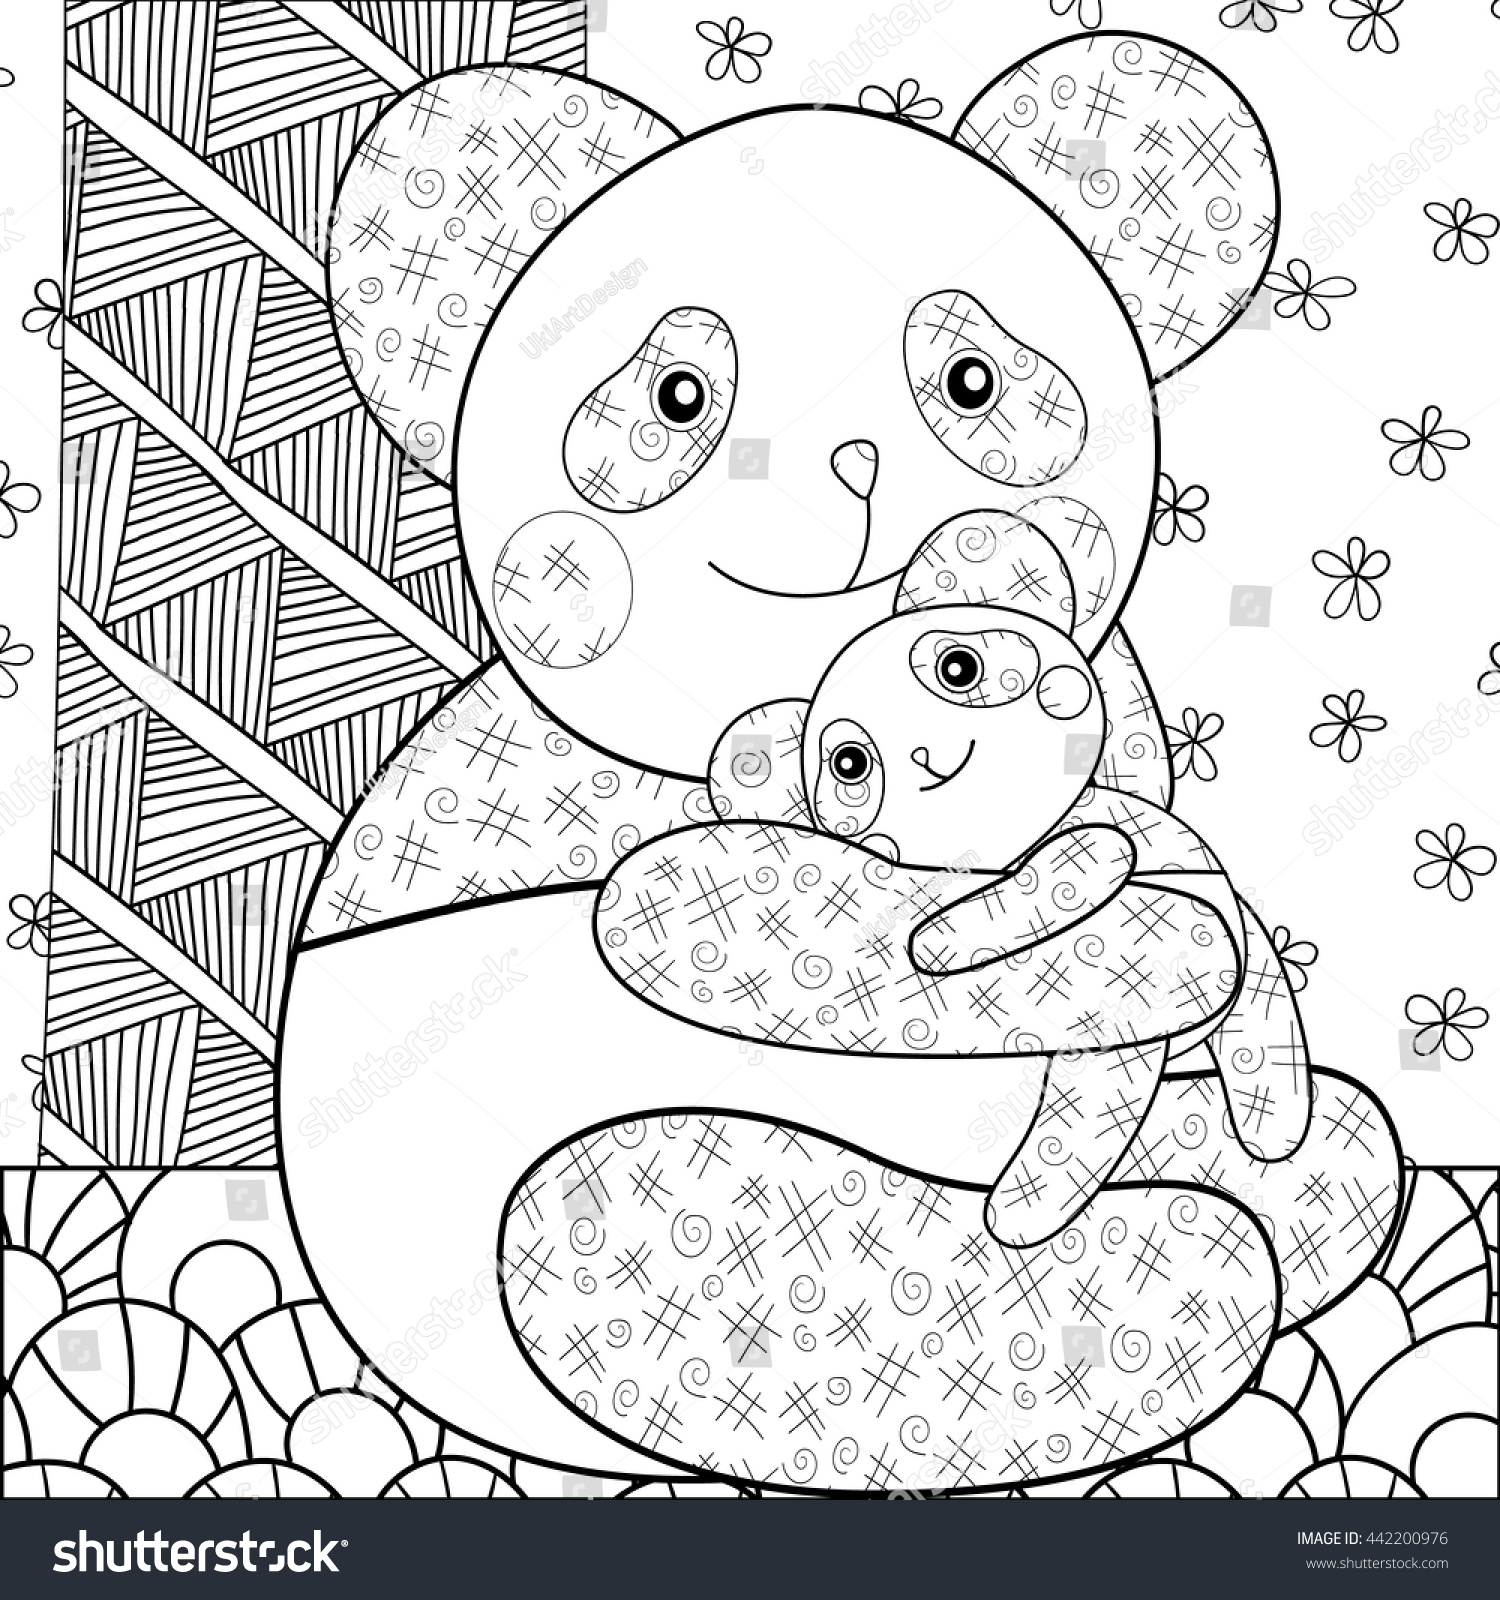 Adult Coloring Page Cute Panda Hugging His Baby. Whimsical Line Art